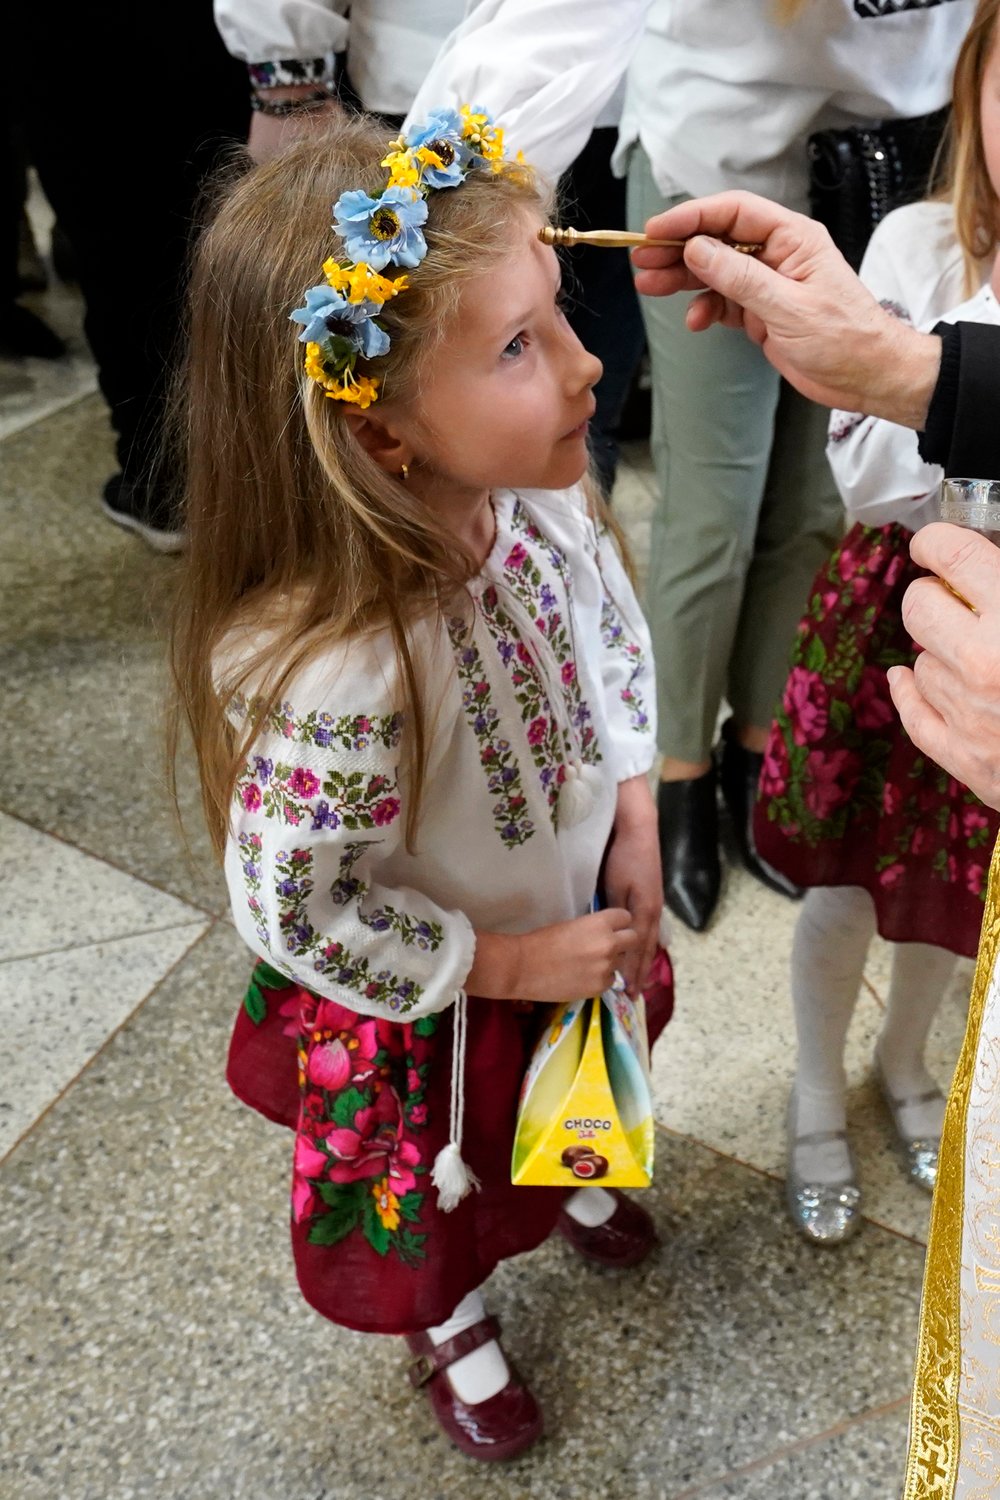 A priest blesses a girl with holy oil following an Easter Divine Liturgy April 24 at St. George Ukrainian Catholic Church in Manhattan’s East Village.